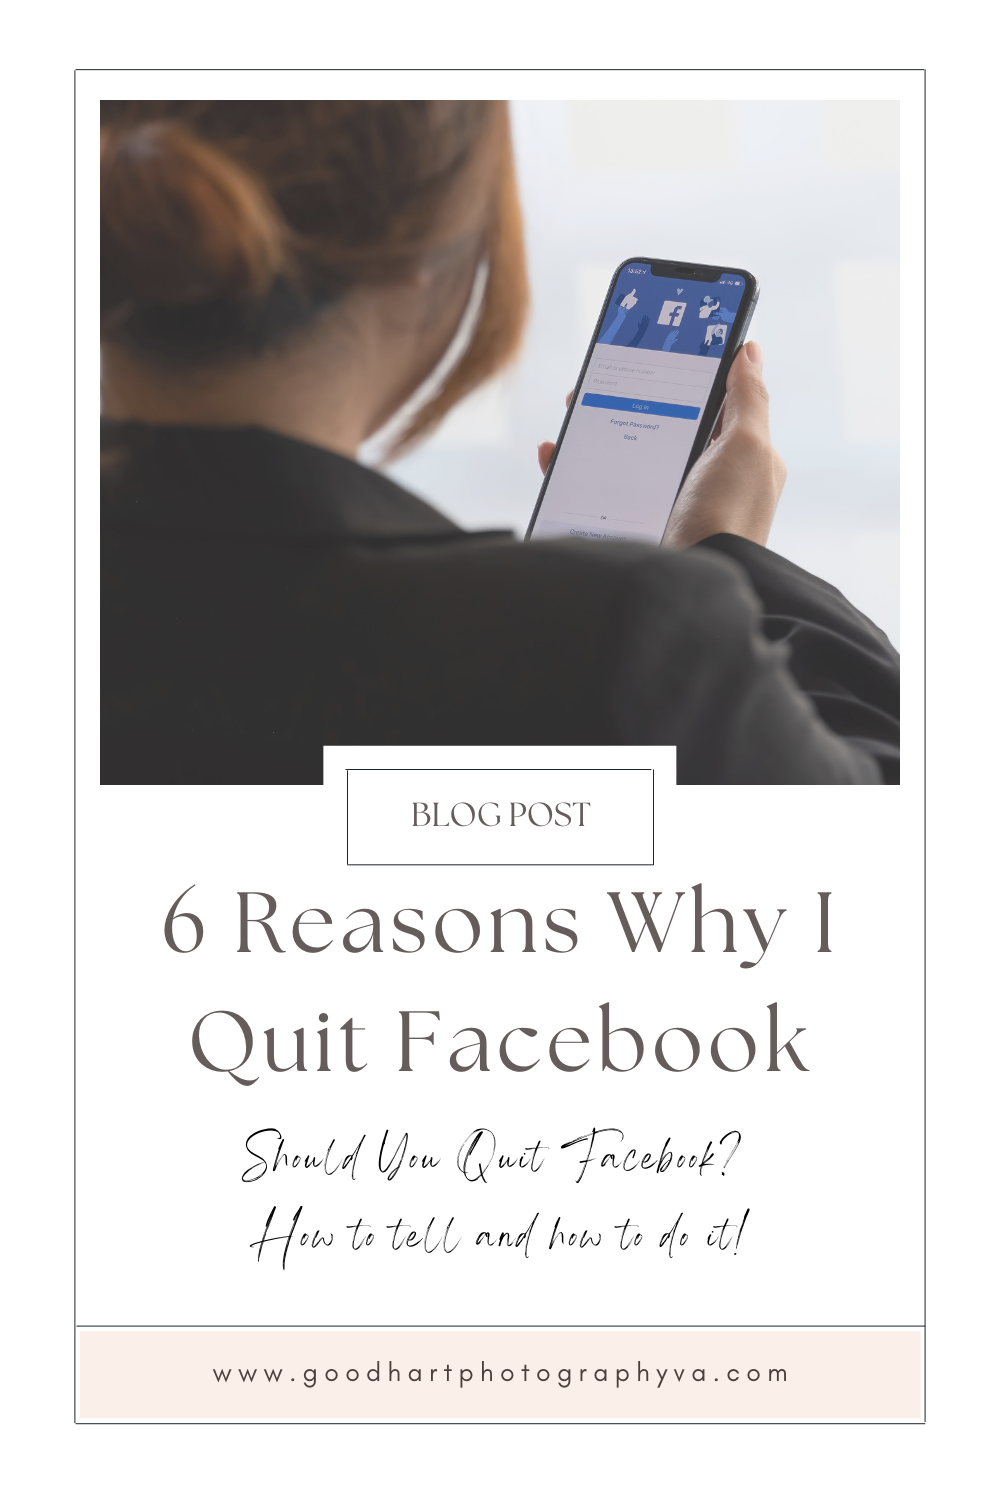 6 reasons why I quit Facebook
